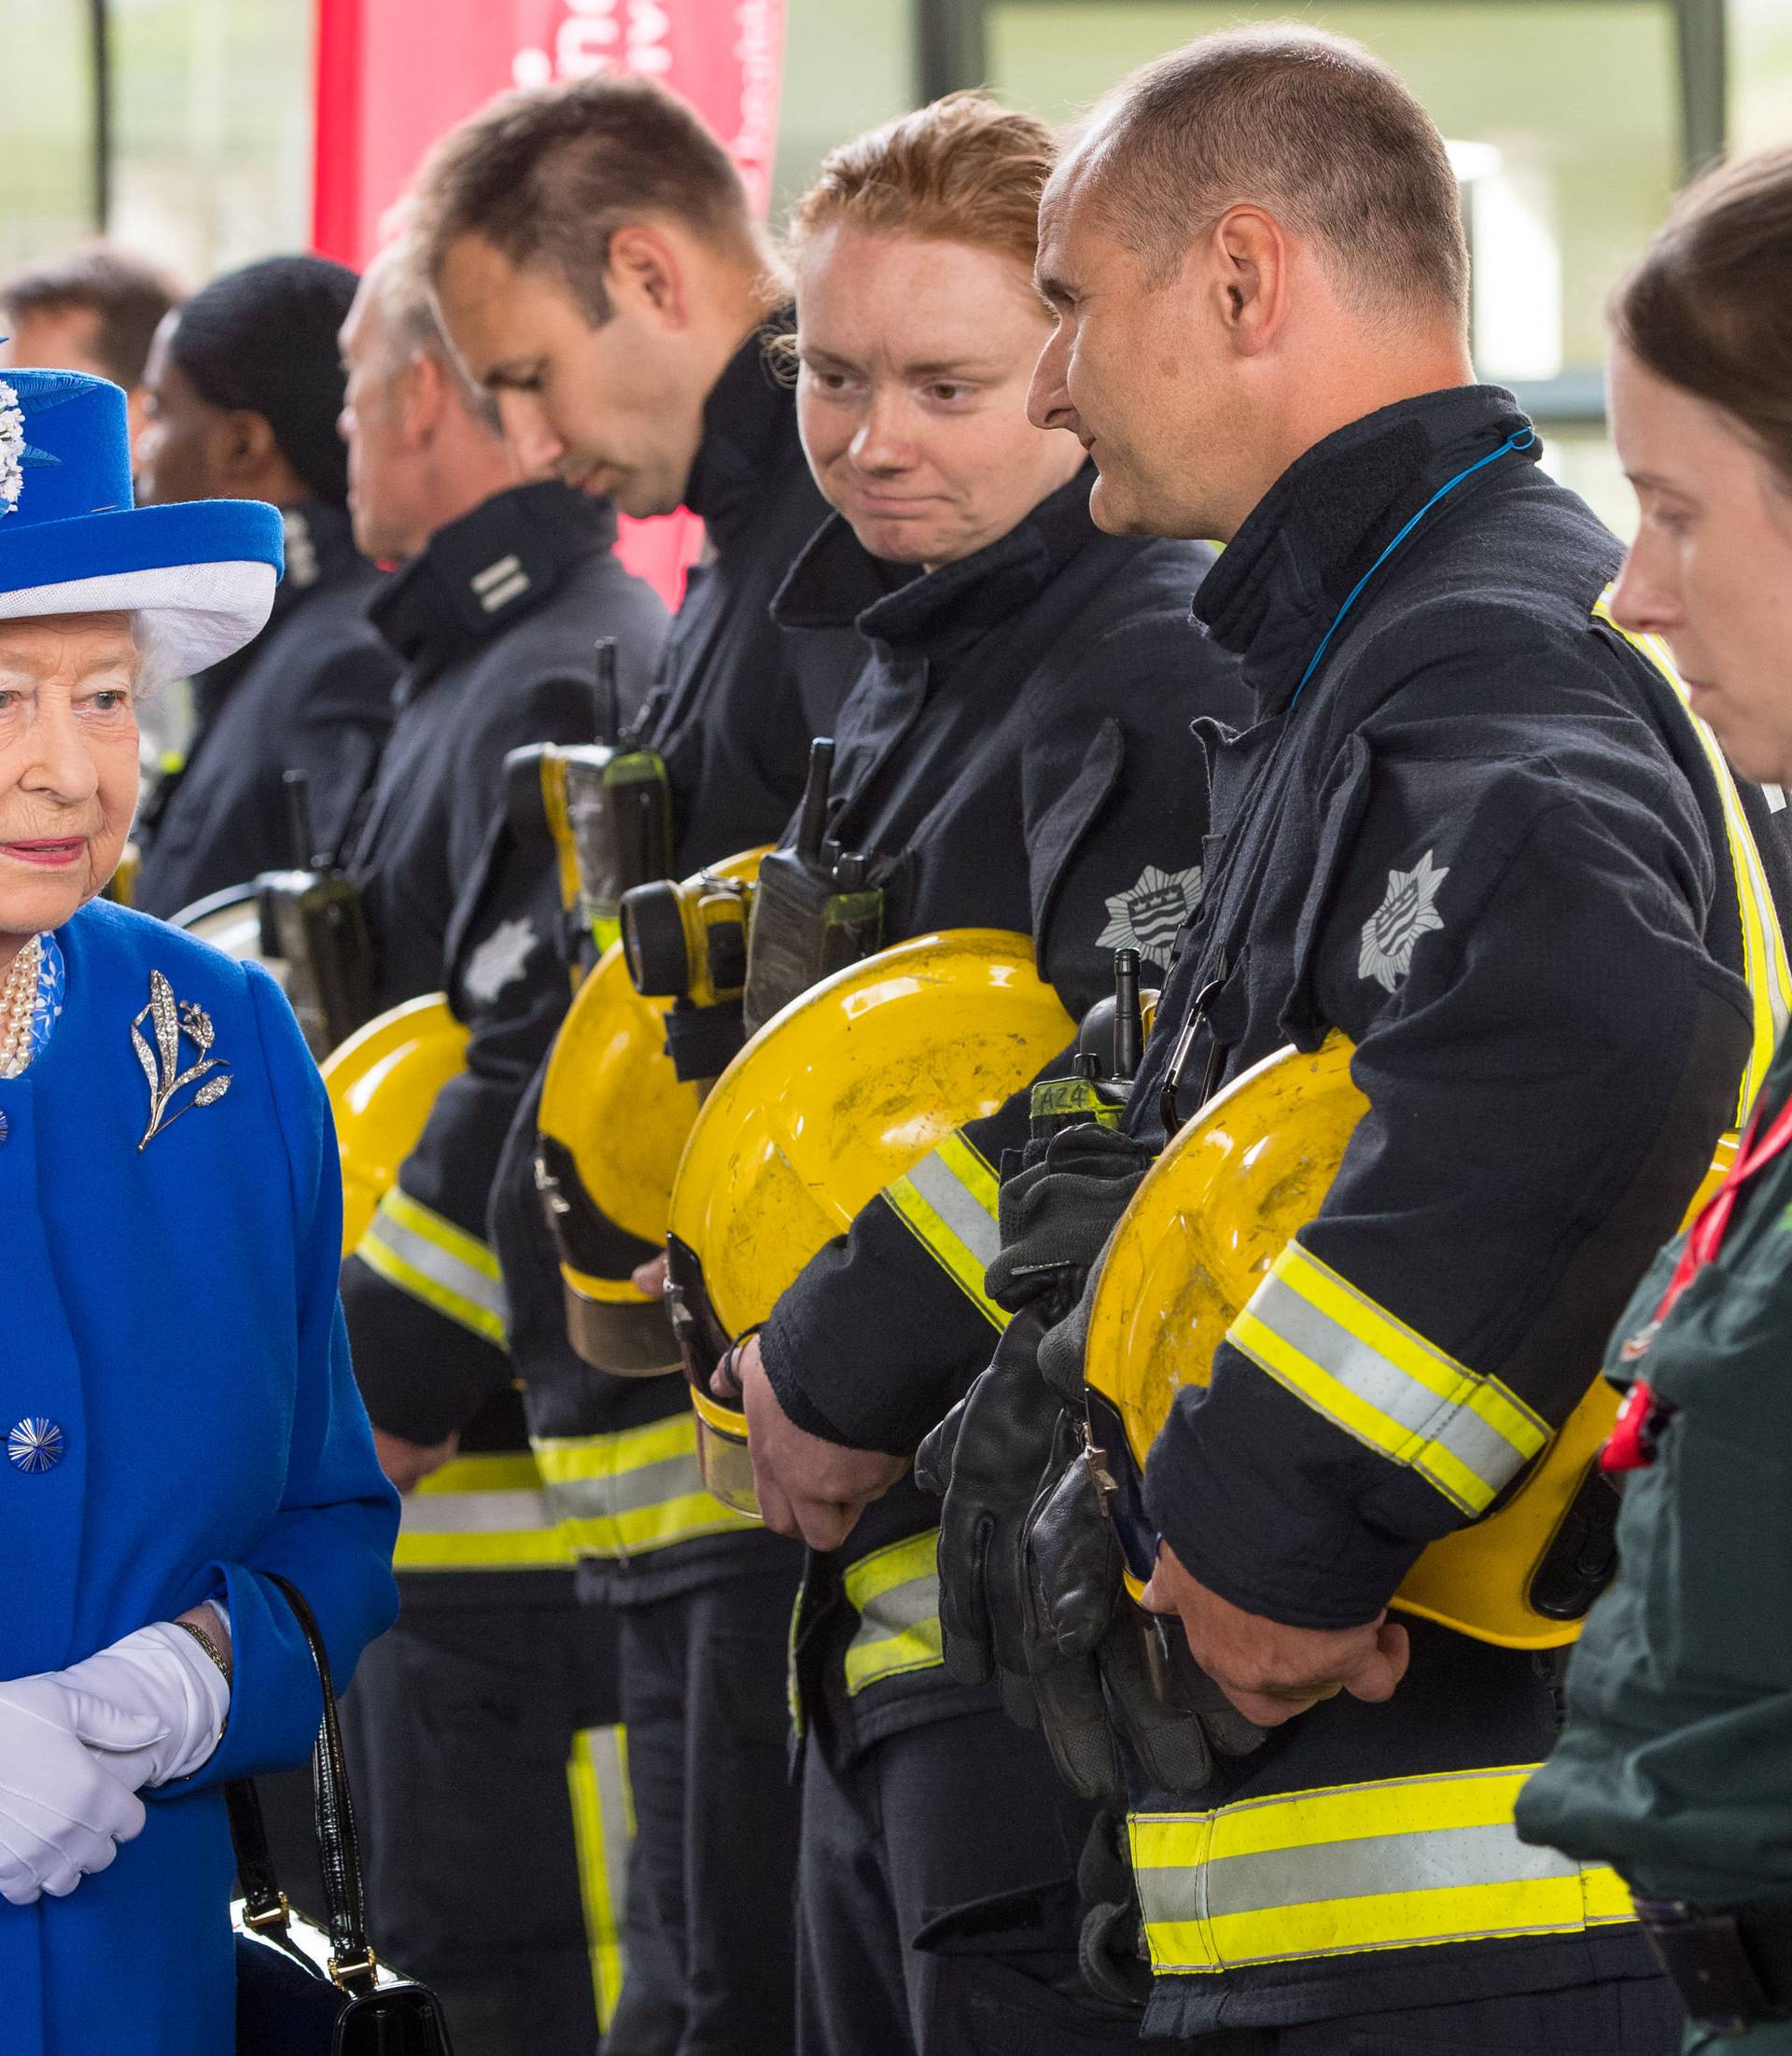 Britain's Queen Elizabeth meets firefighters during a visit to the Westway Sports Centre following the fire at the Grenfell Tower block, in north Kensington, West London